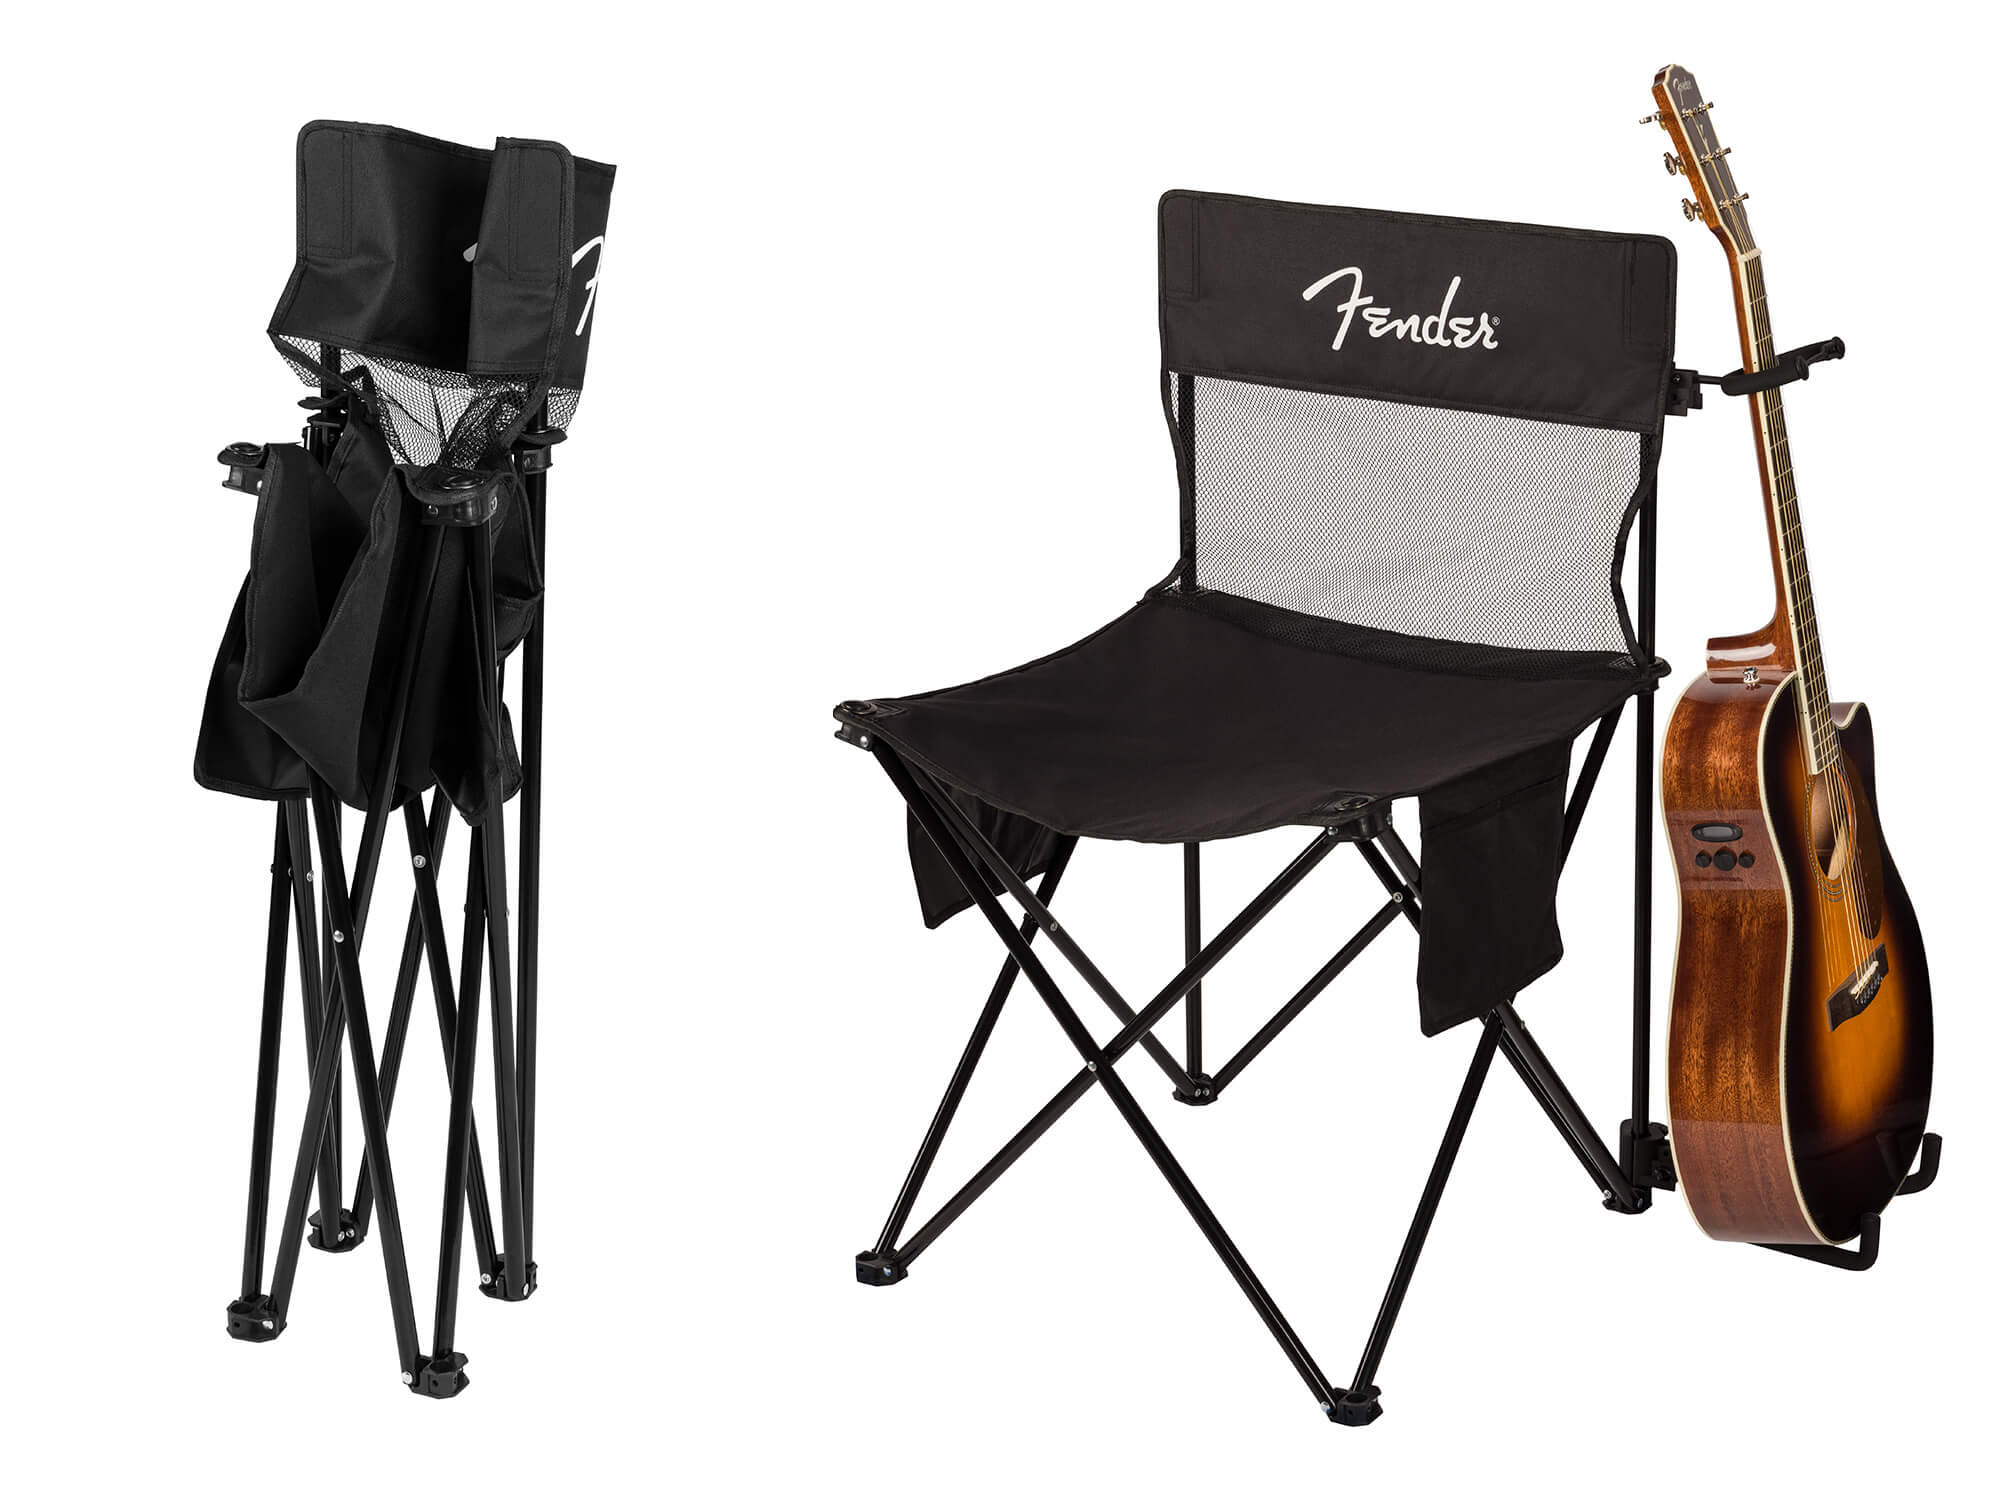 Fender Festival Chair folded (left) and open with guitar attached (right)